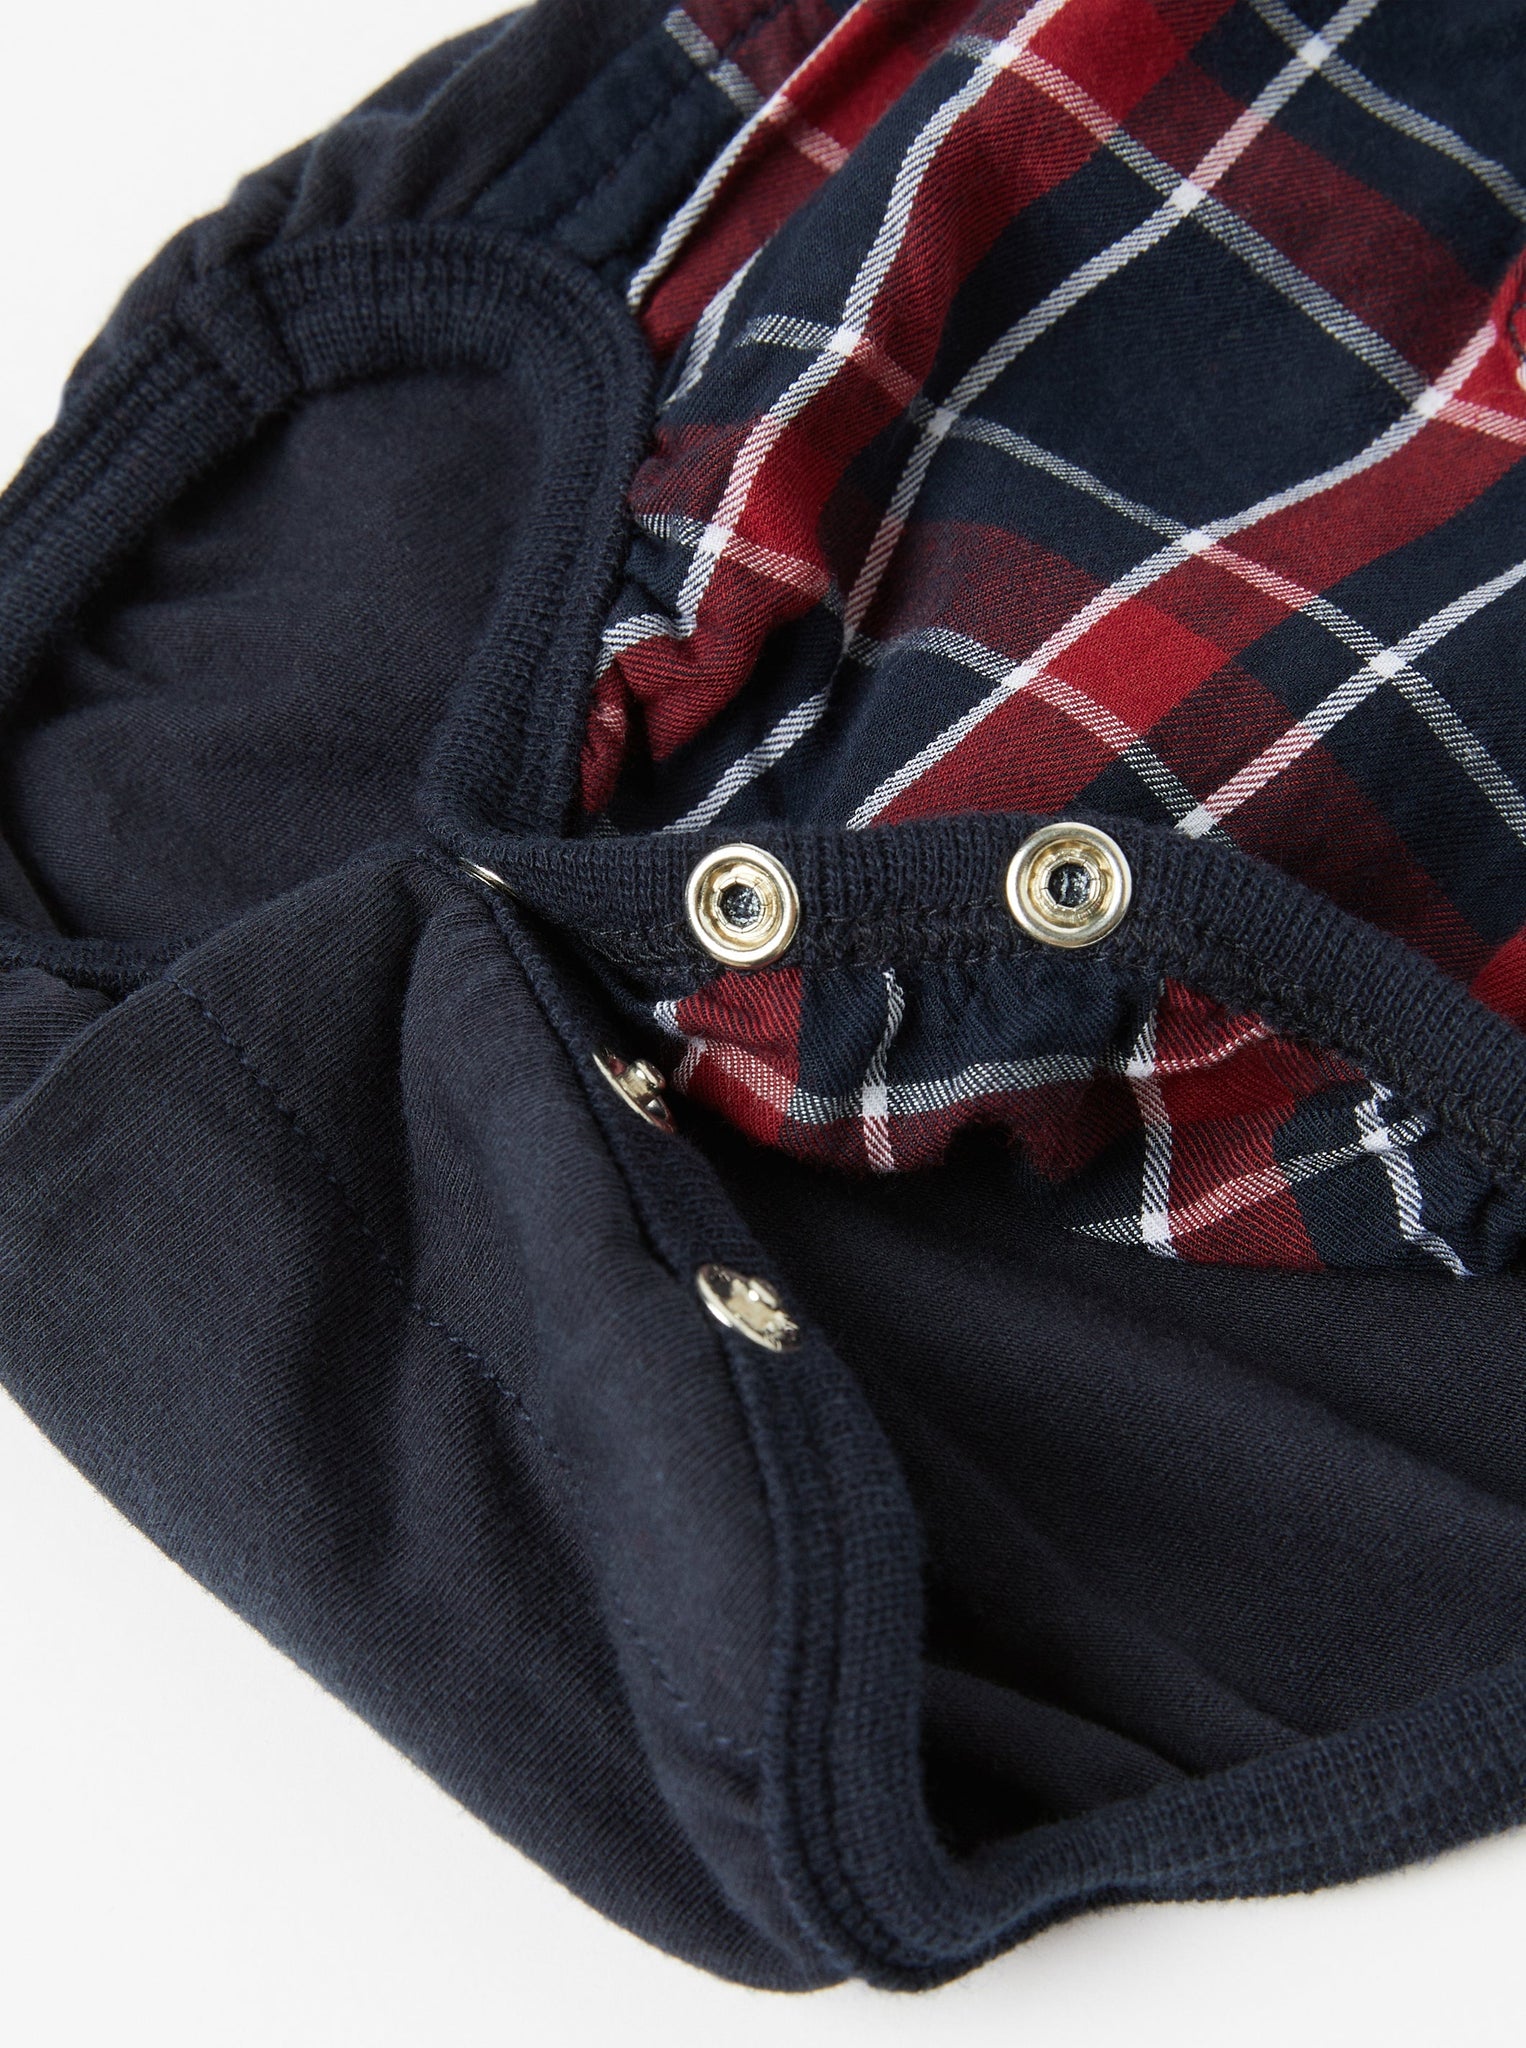 Newborn Checked Shirt Babygrow from the Polarn O. Pyret baby collection. Nordic baby clothes made from sustainable sources.